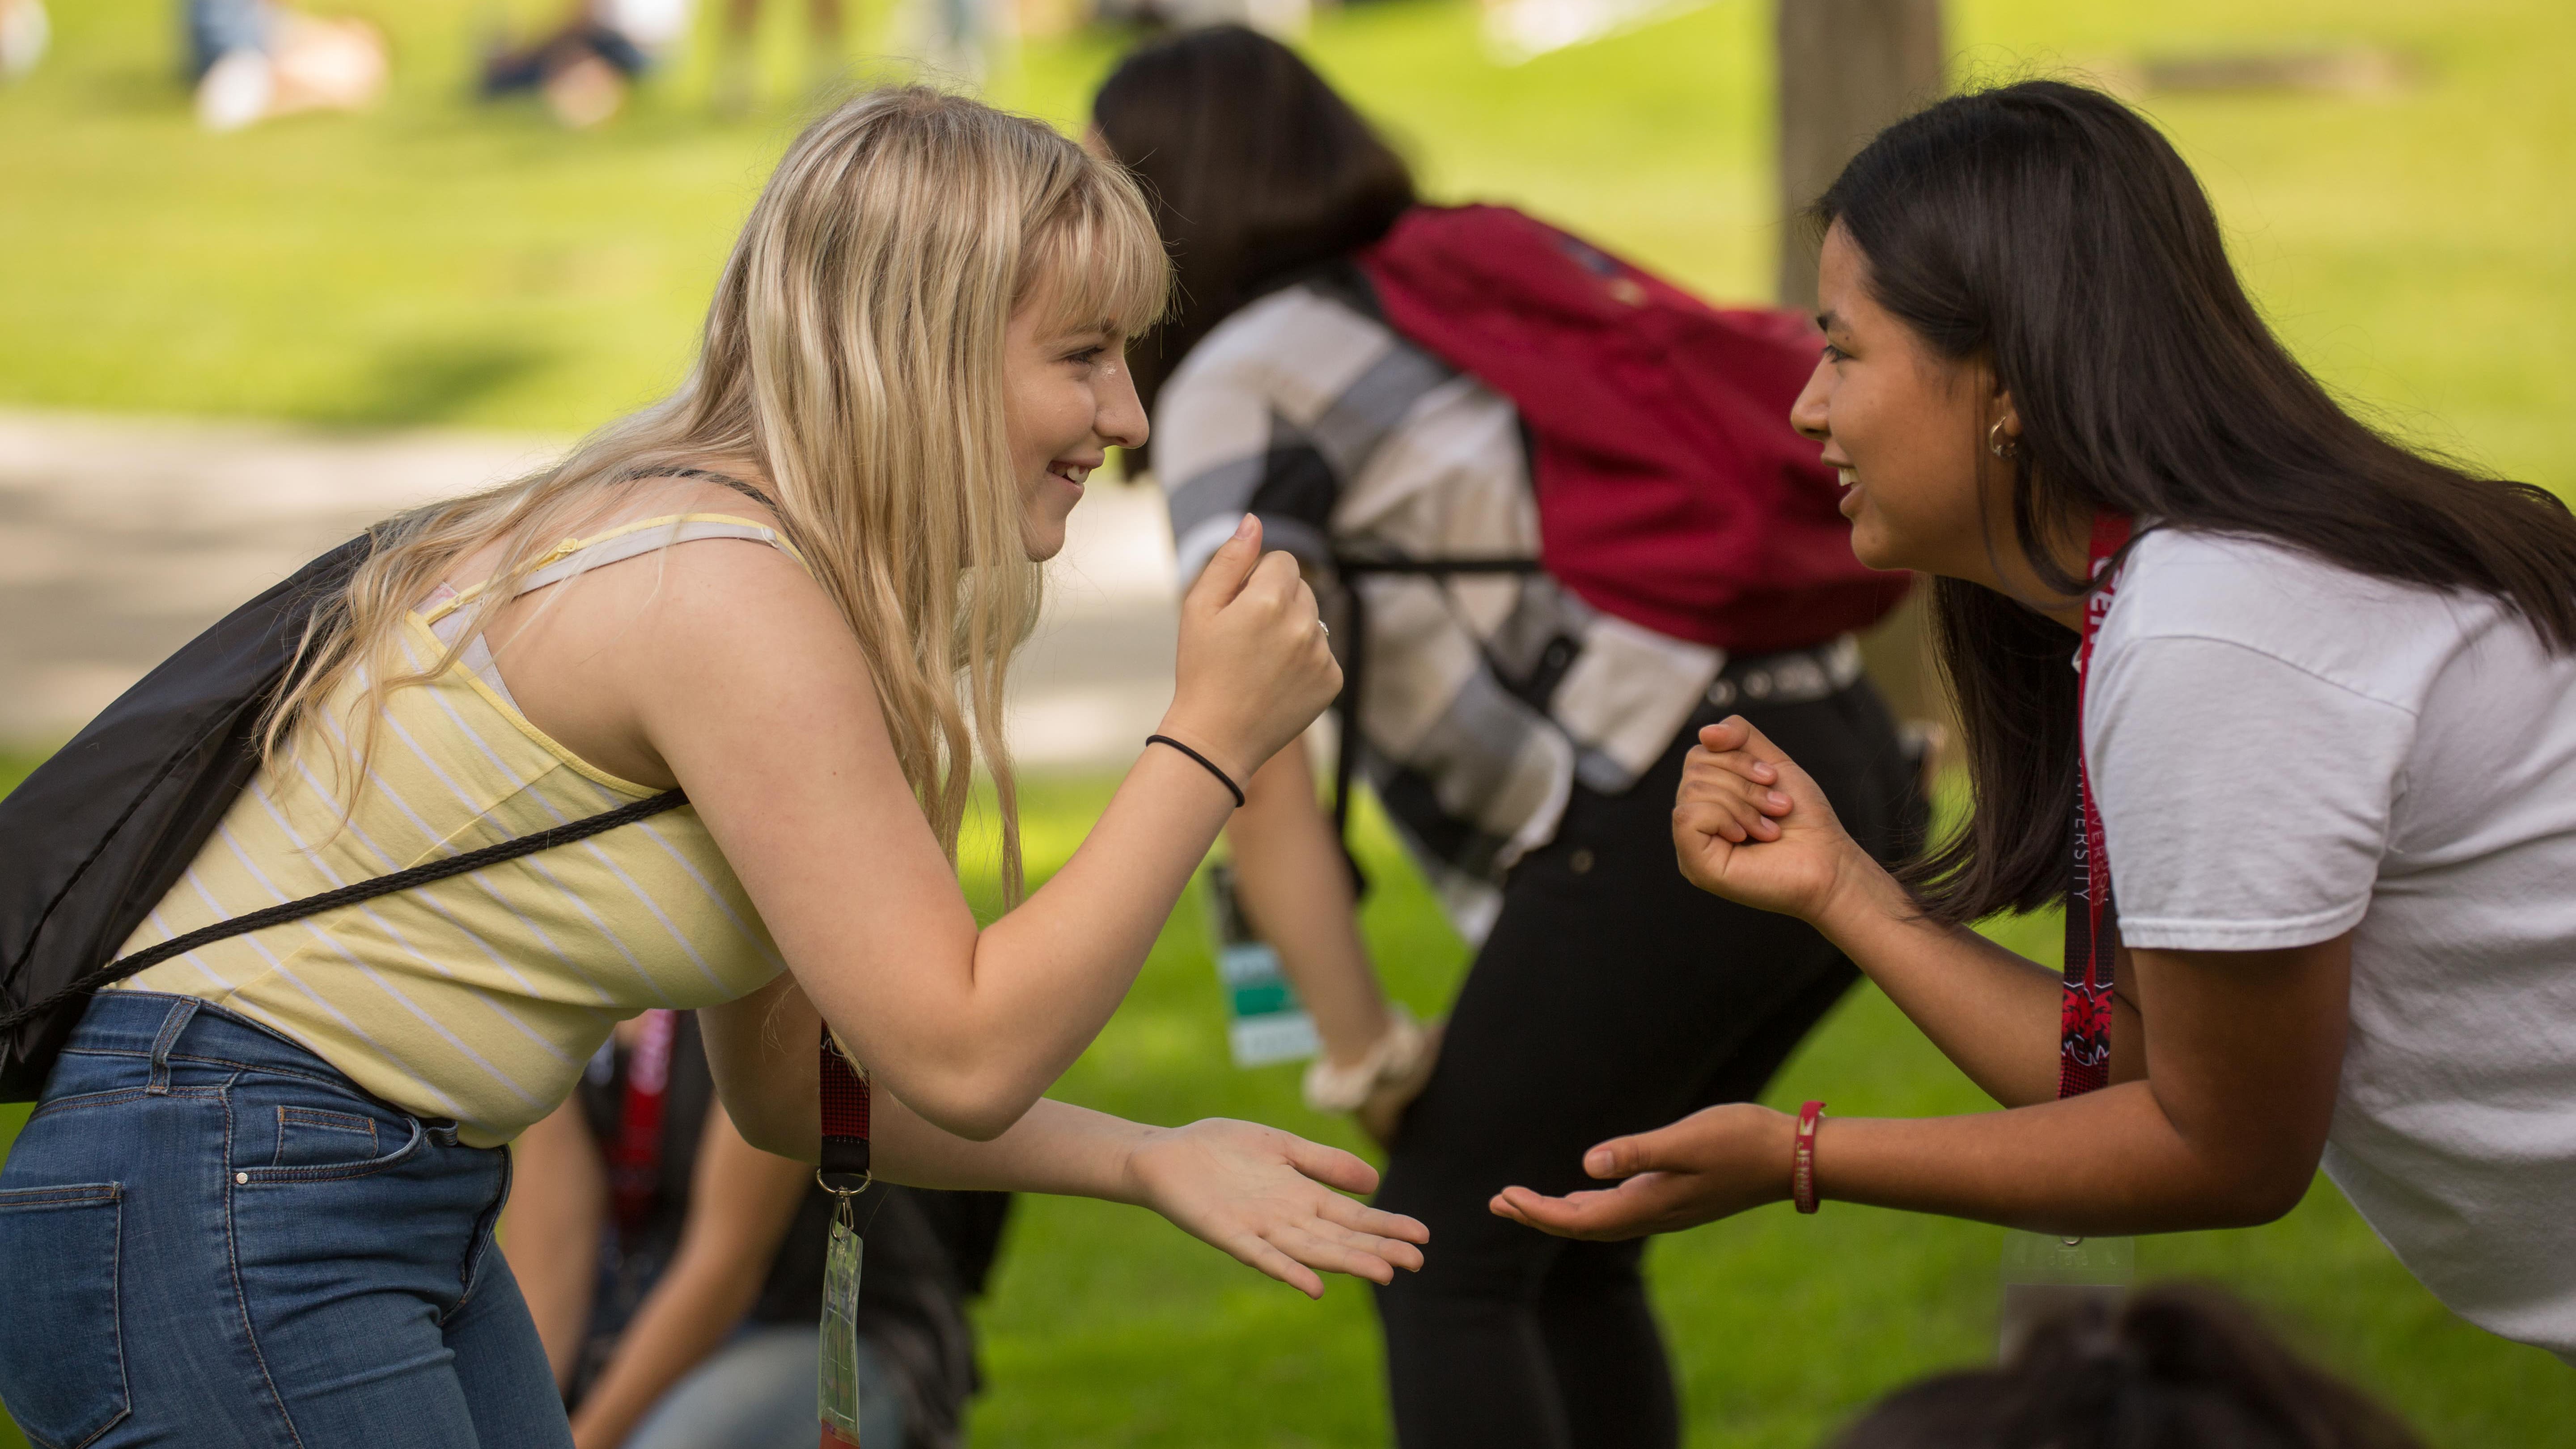 Two girls are outside and playing rock paper scissors. There is green grass in the background.